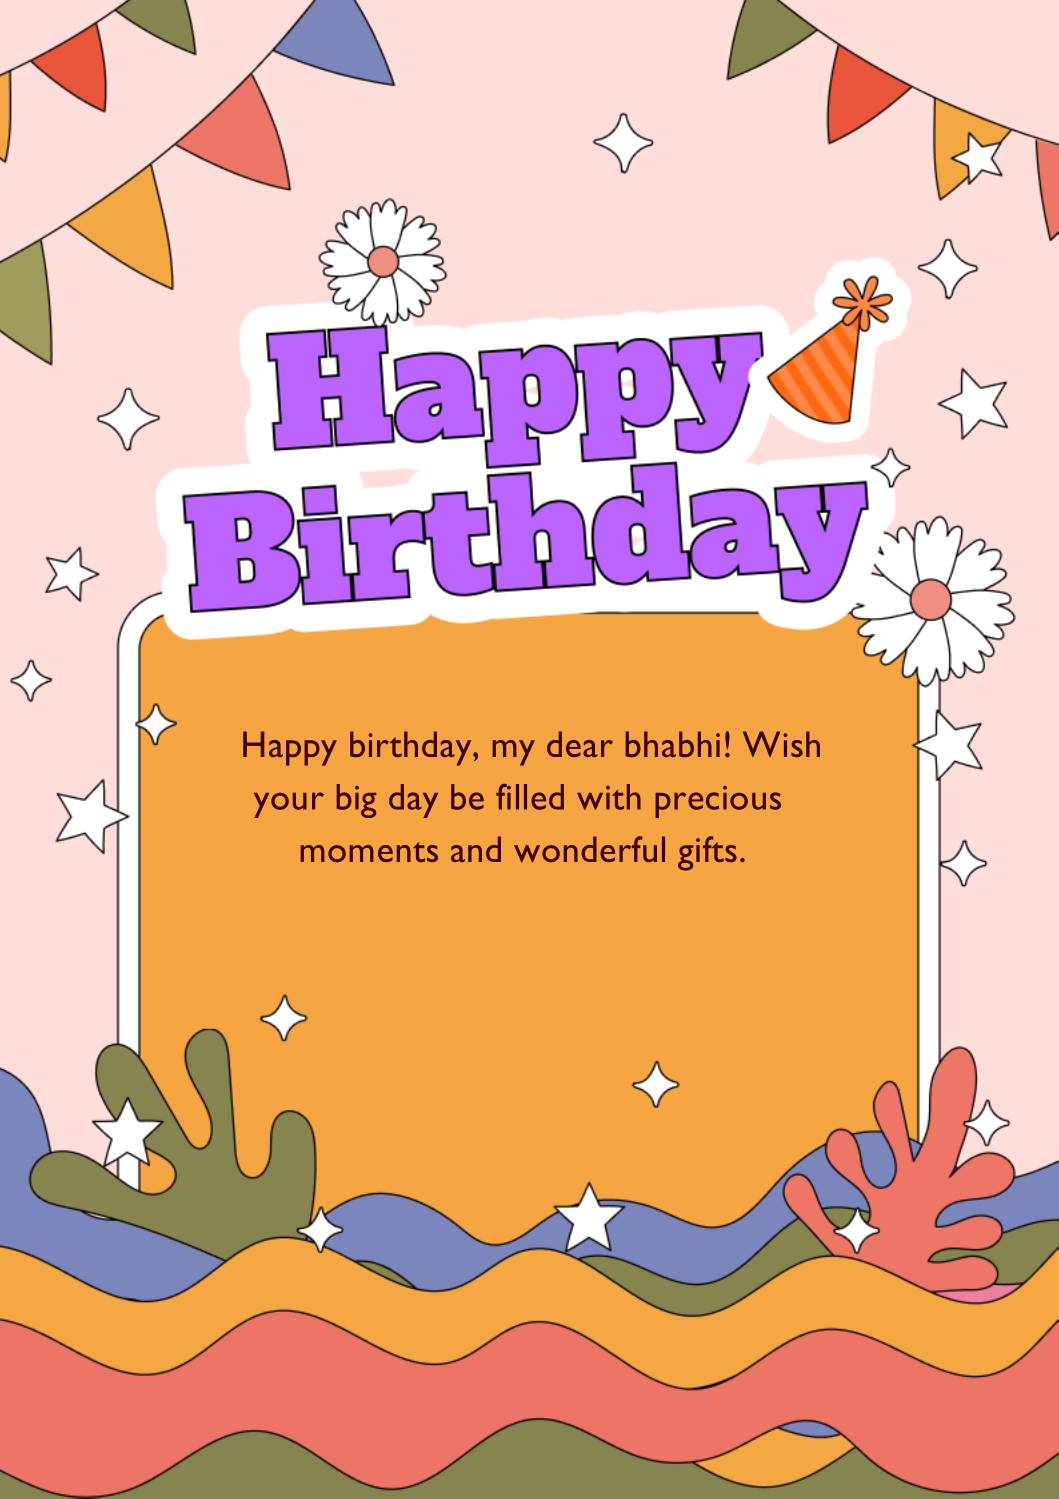 Happy Birthday wishes for Brother - PiksHour Happy birthday images | Happy  birthday brother, Happy birthday bhai wishes, Happy birthday wishes images